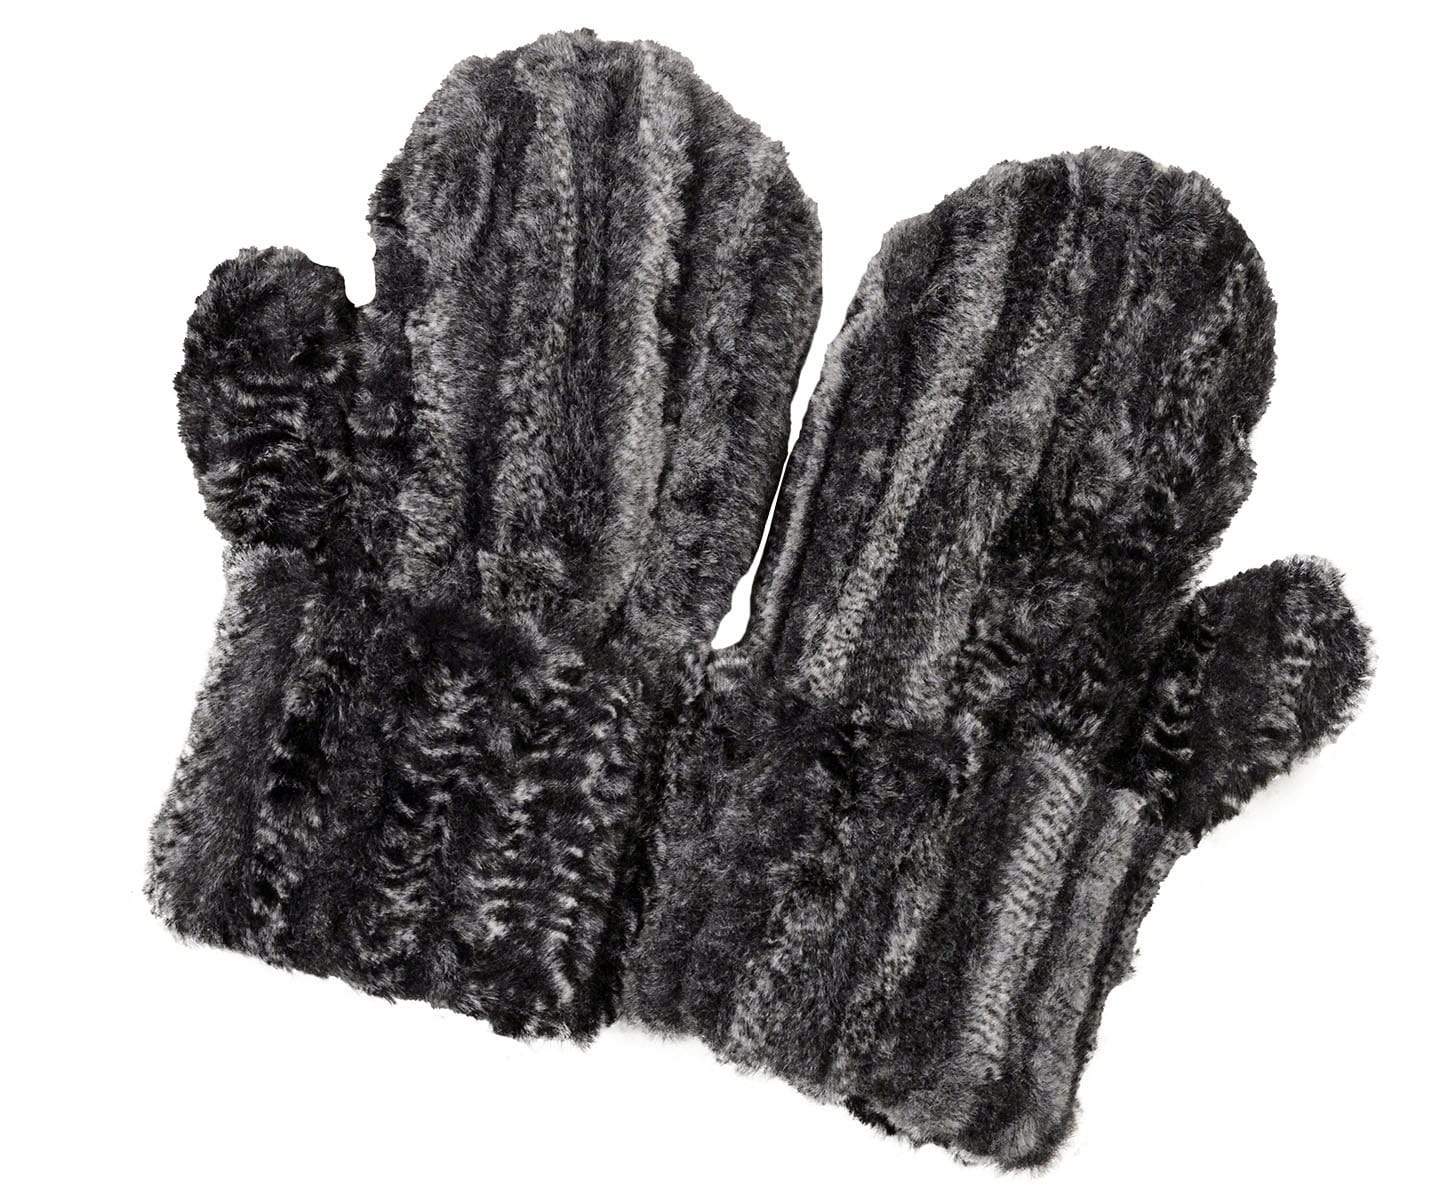 Men’s Product shot of Mittens. Gauntlets,  Mitts | Rattle ‘N’ Shake animal print in black, cream and gray Faux Fur | Handmade by Pandemonium Millinery Seattle, WA USA